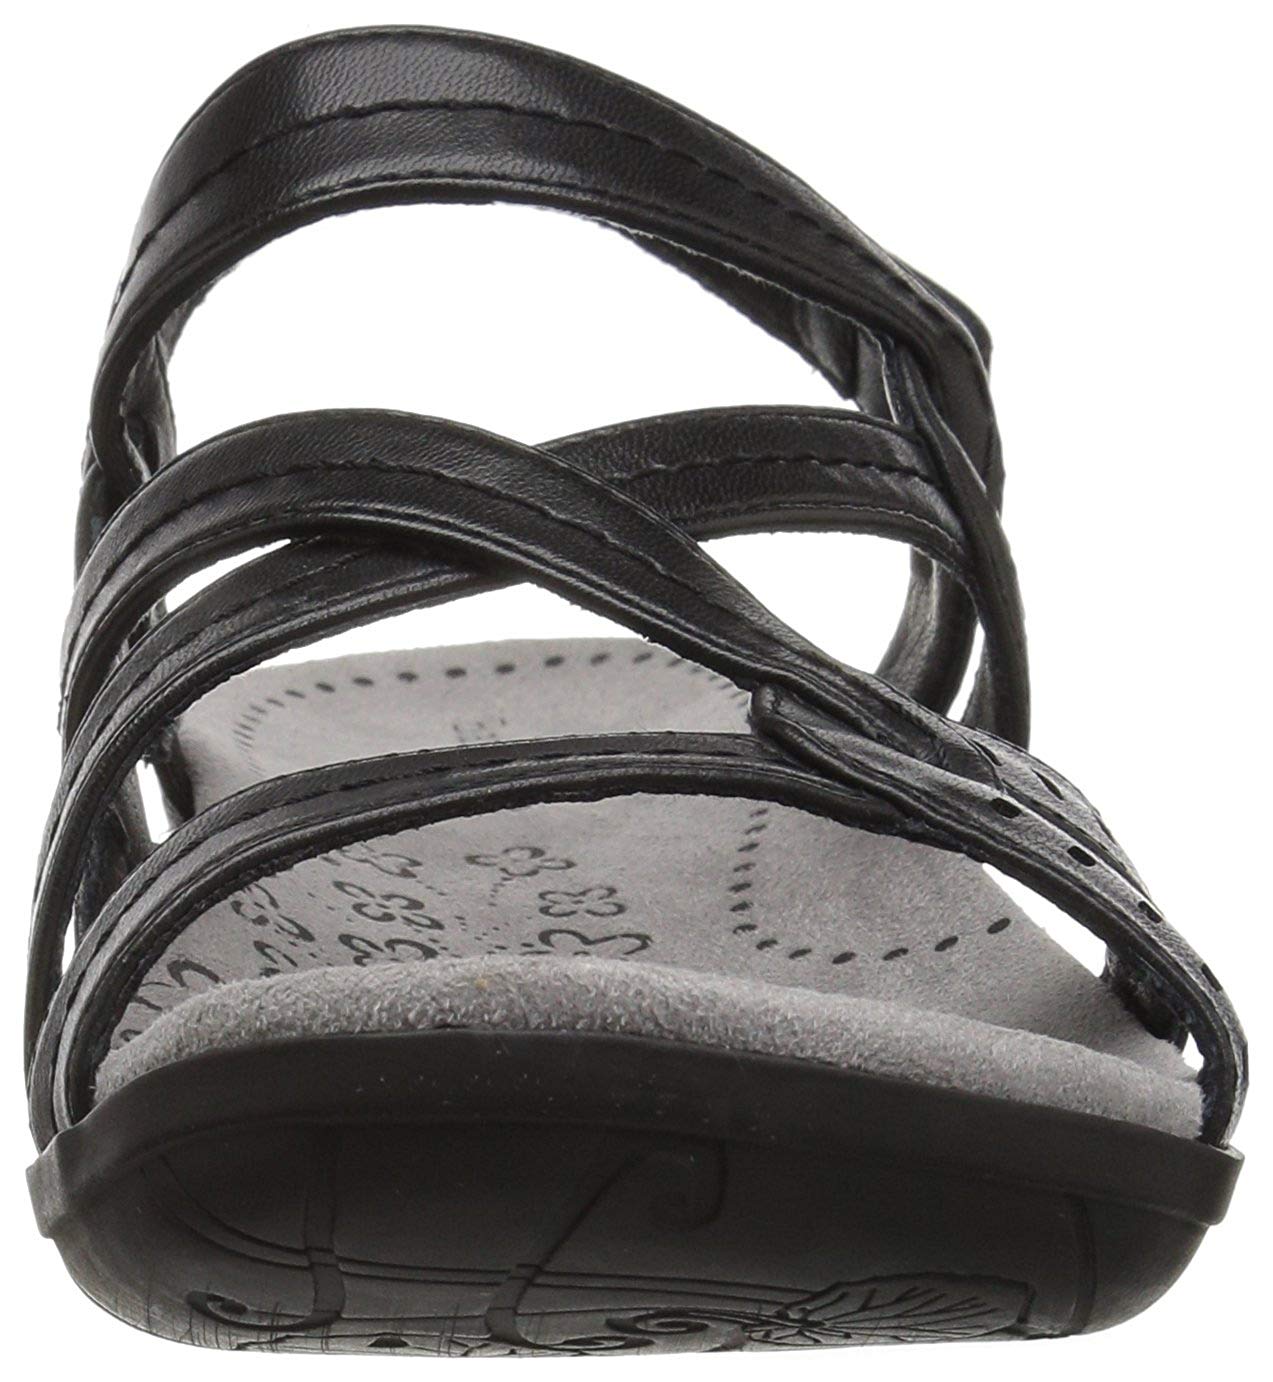 Bare Traps Womens Jacey Open Toe Casual Strappy Sandals, Black, Size 8. ...